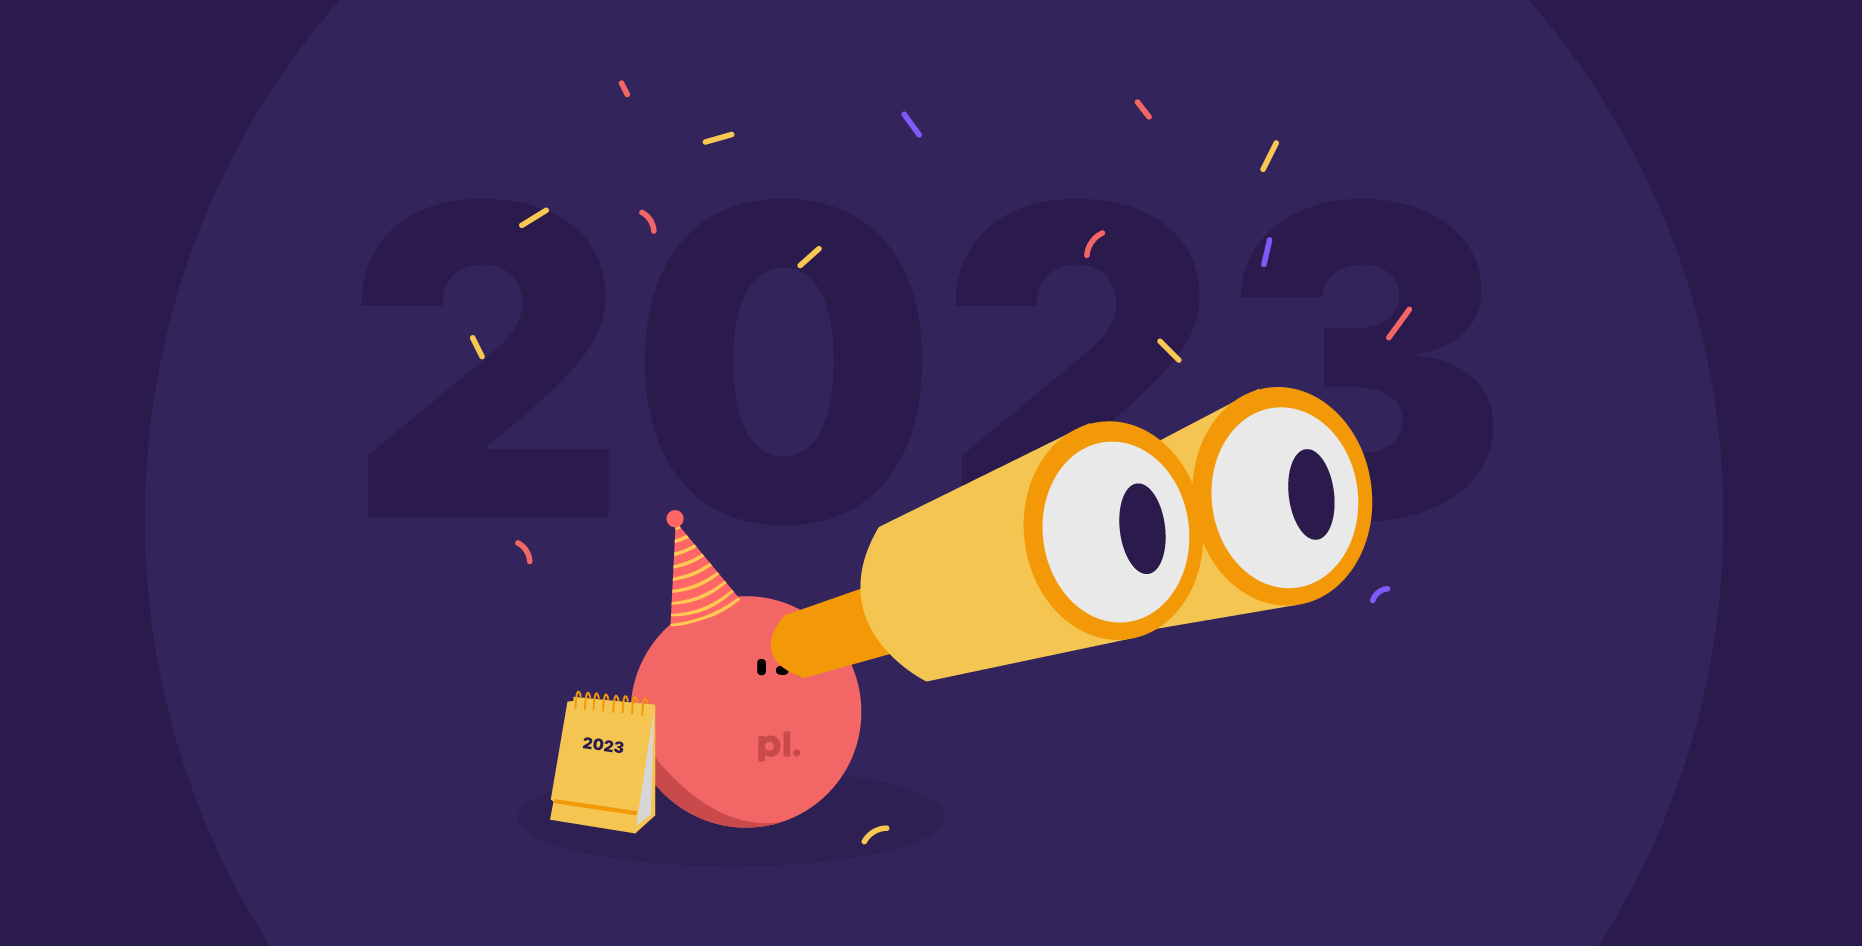 7 Presentation trends to watch out for in 2023